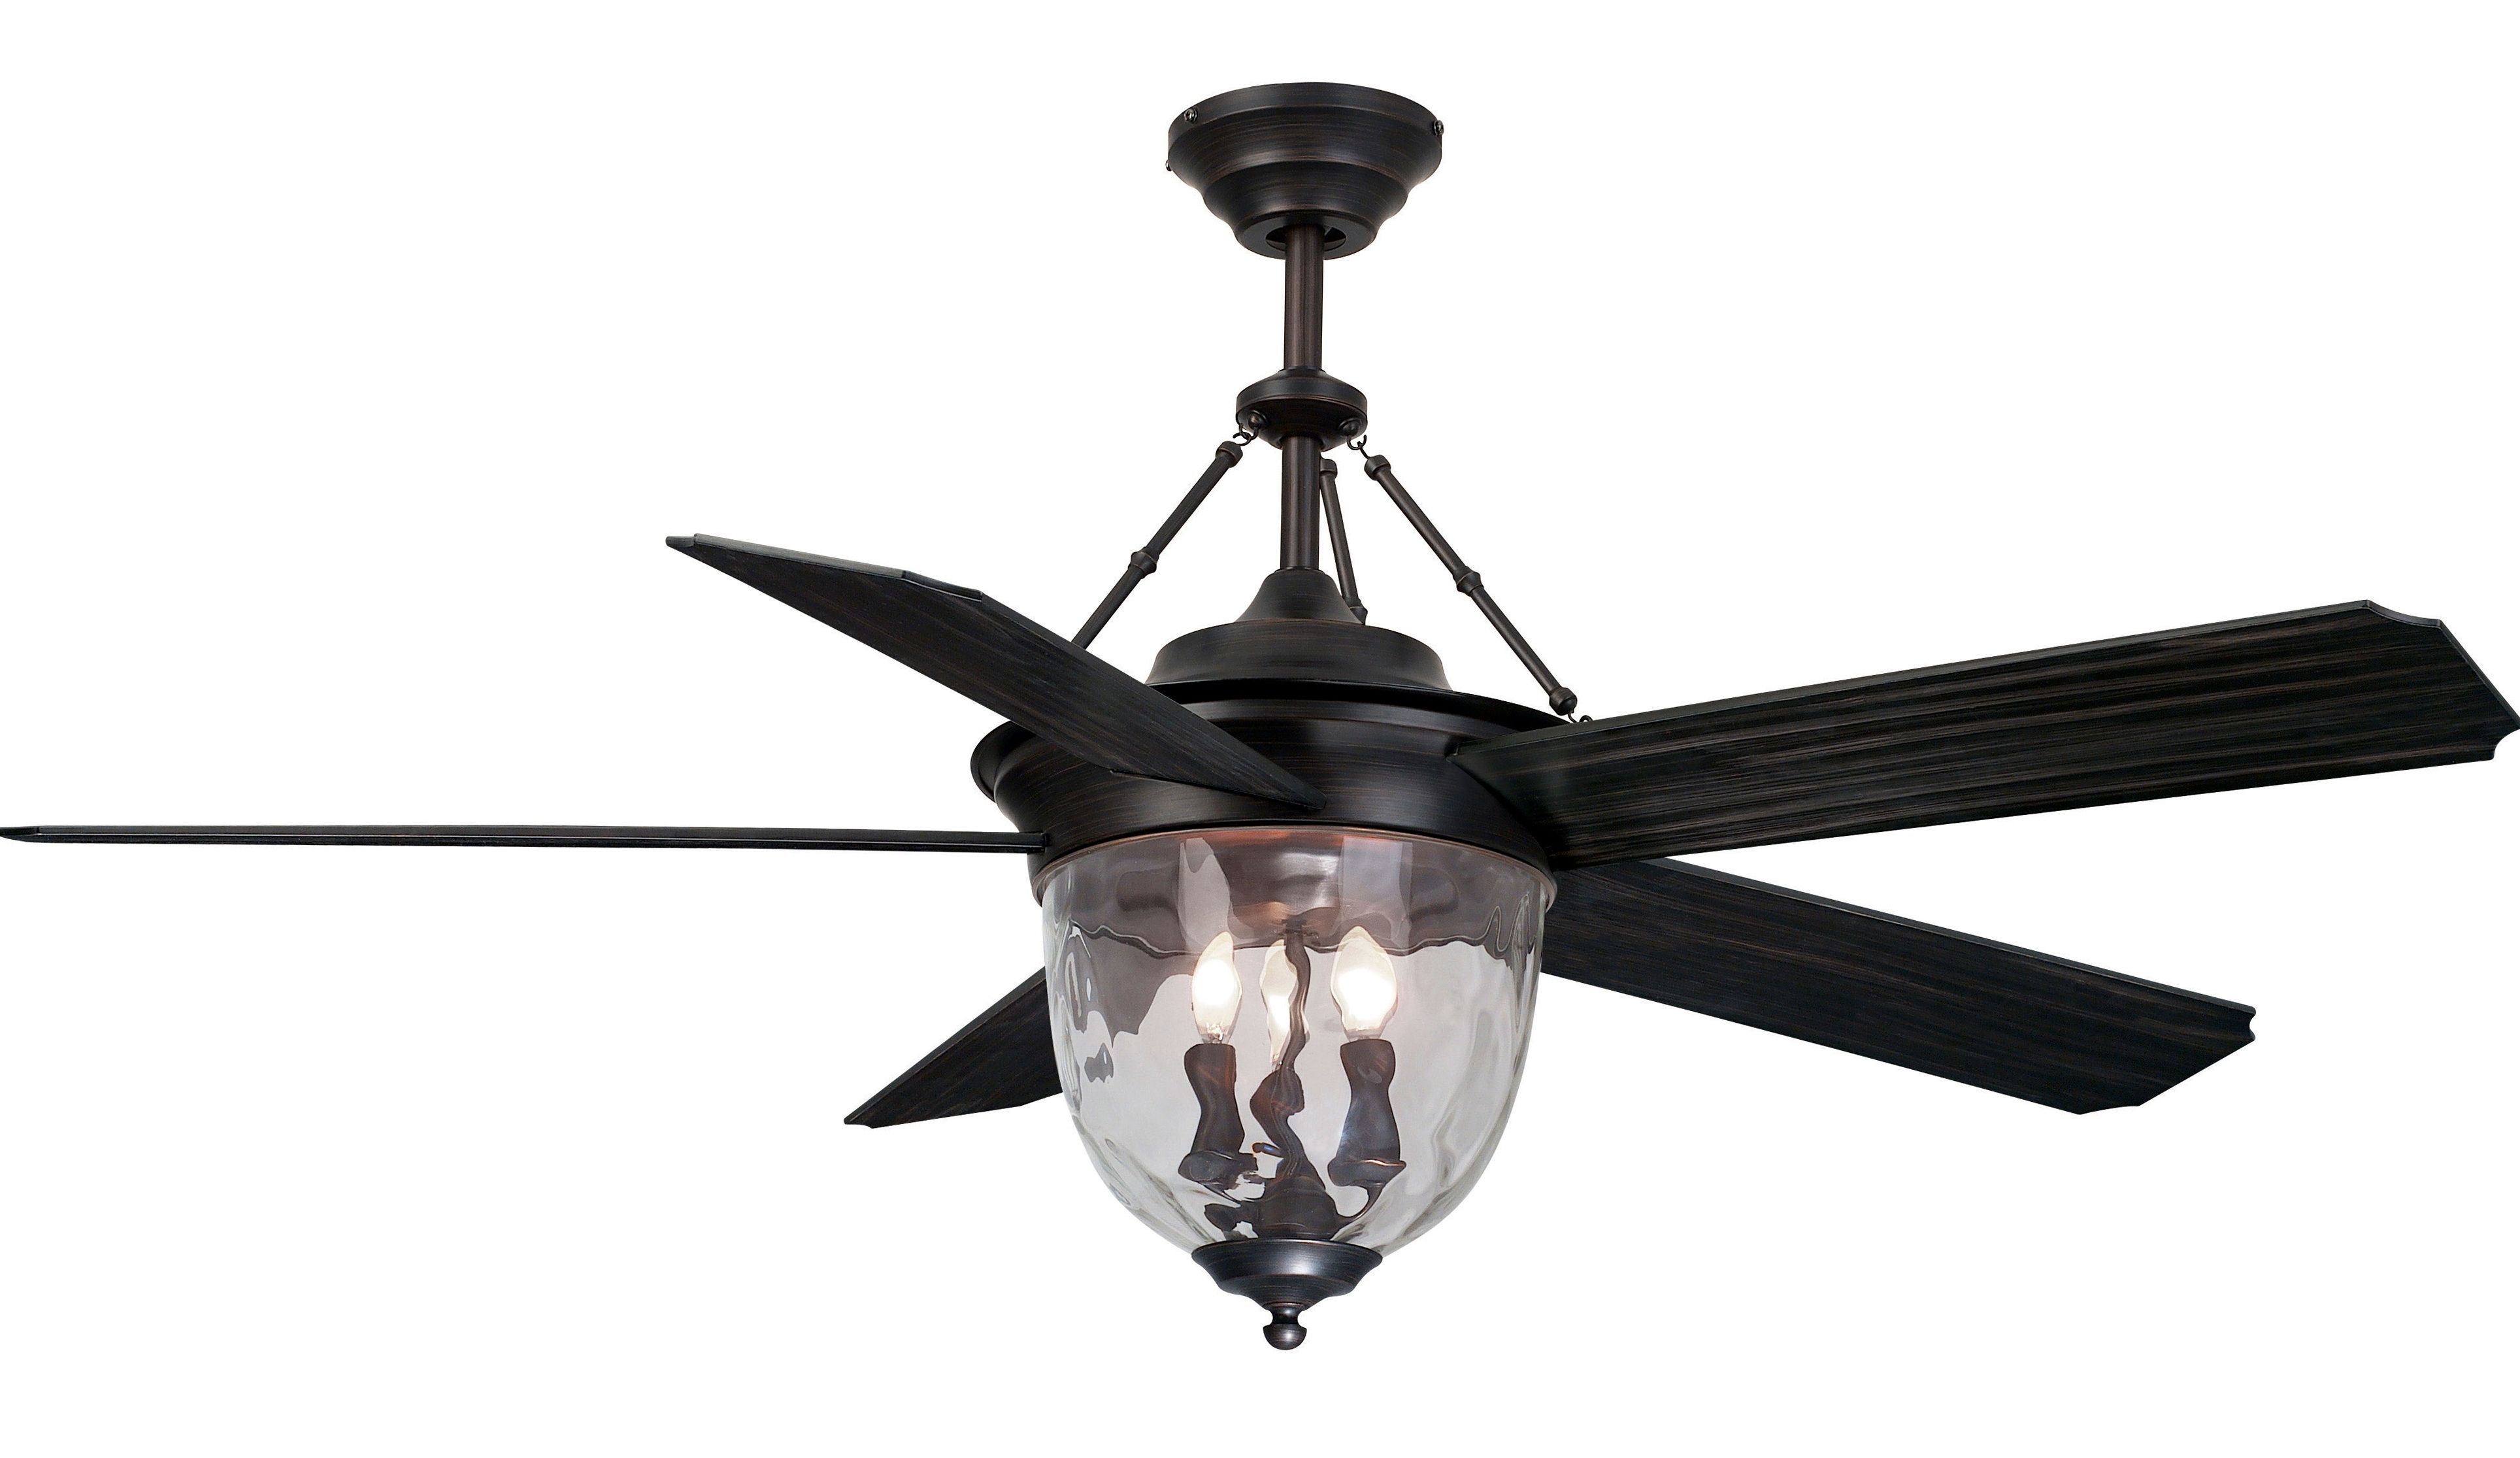 Outdoor Ceiling Fans And Lights Pertaining To Best And Newest Ceiling: Amusing Lowes Ceiling Fans With Lights Outdoor Ceiling Fan (View 14 of 20)